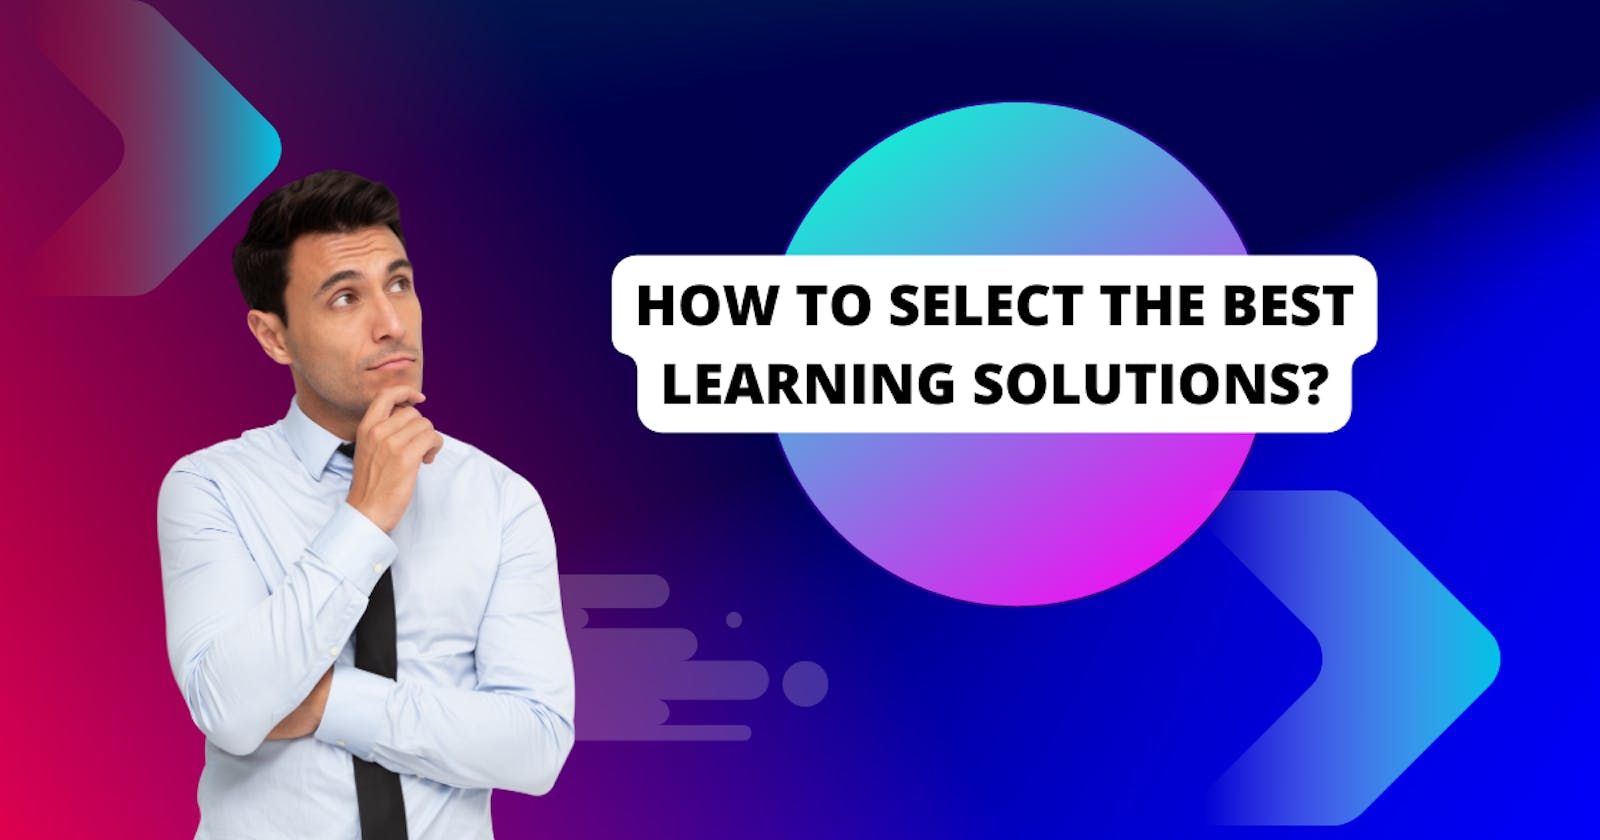 How to select the best learning solutions?